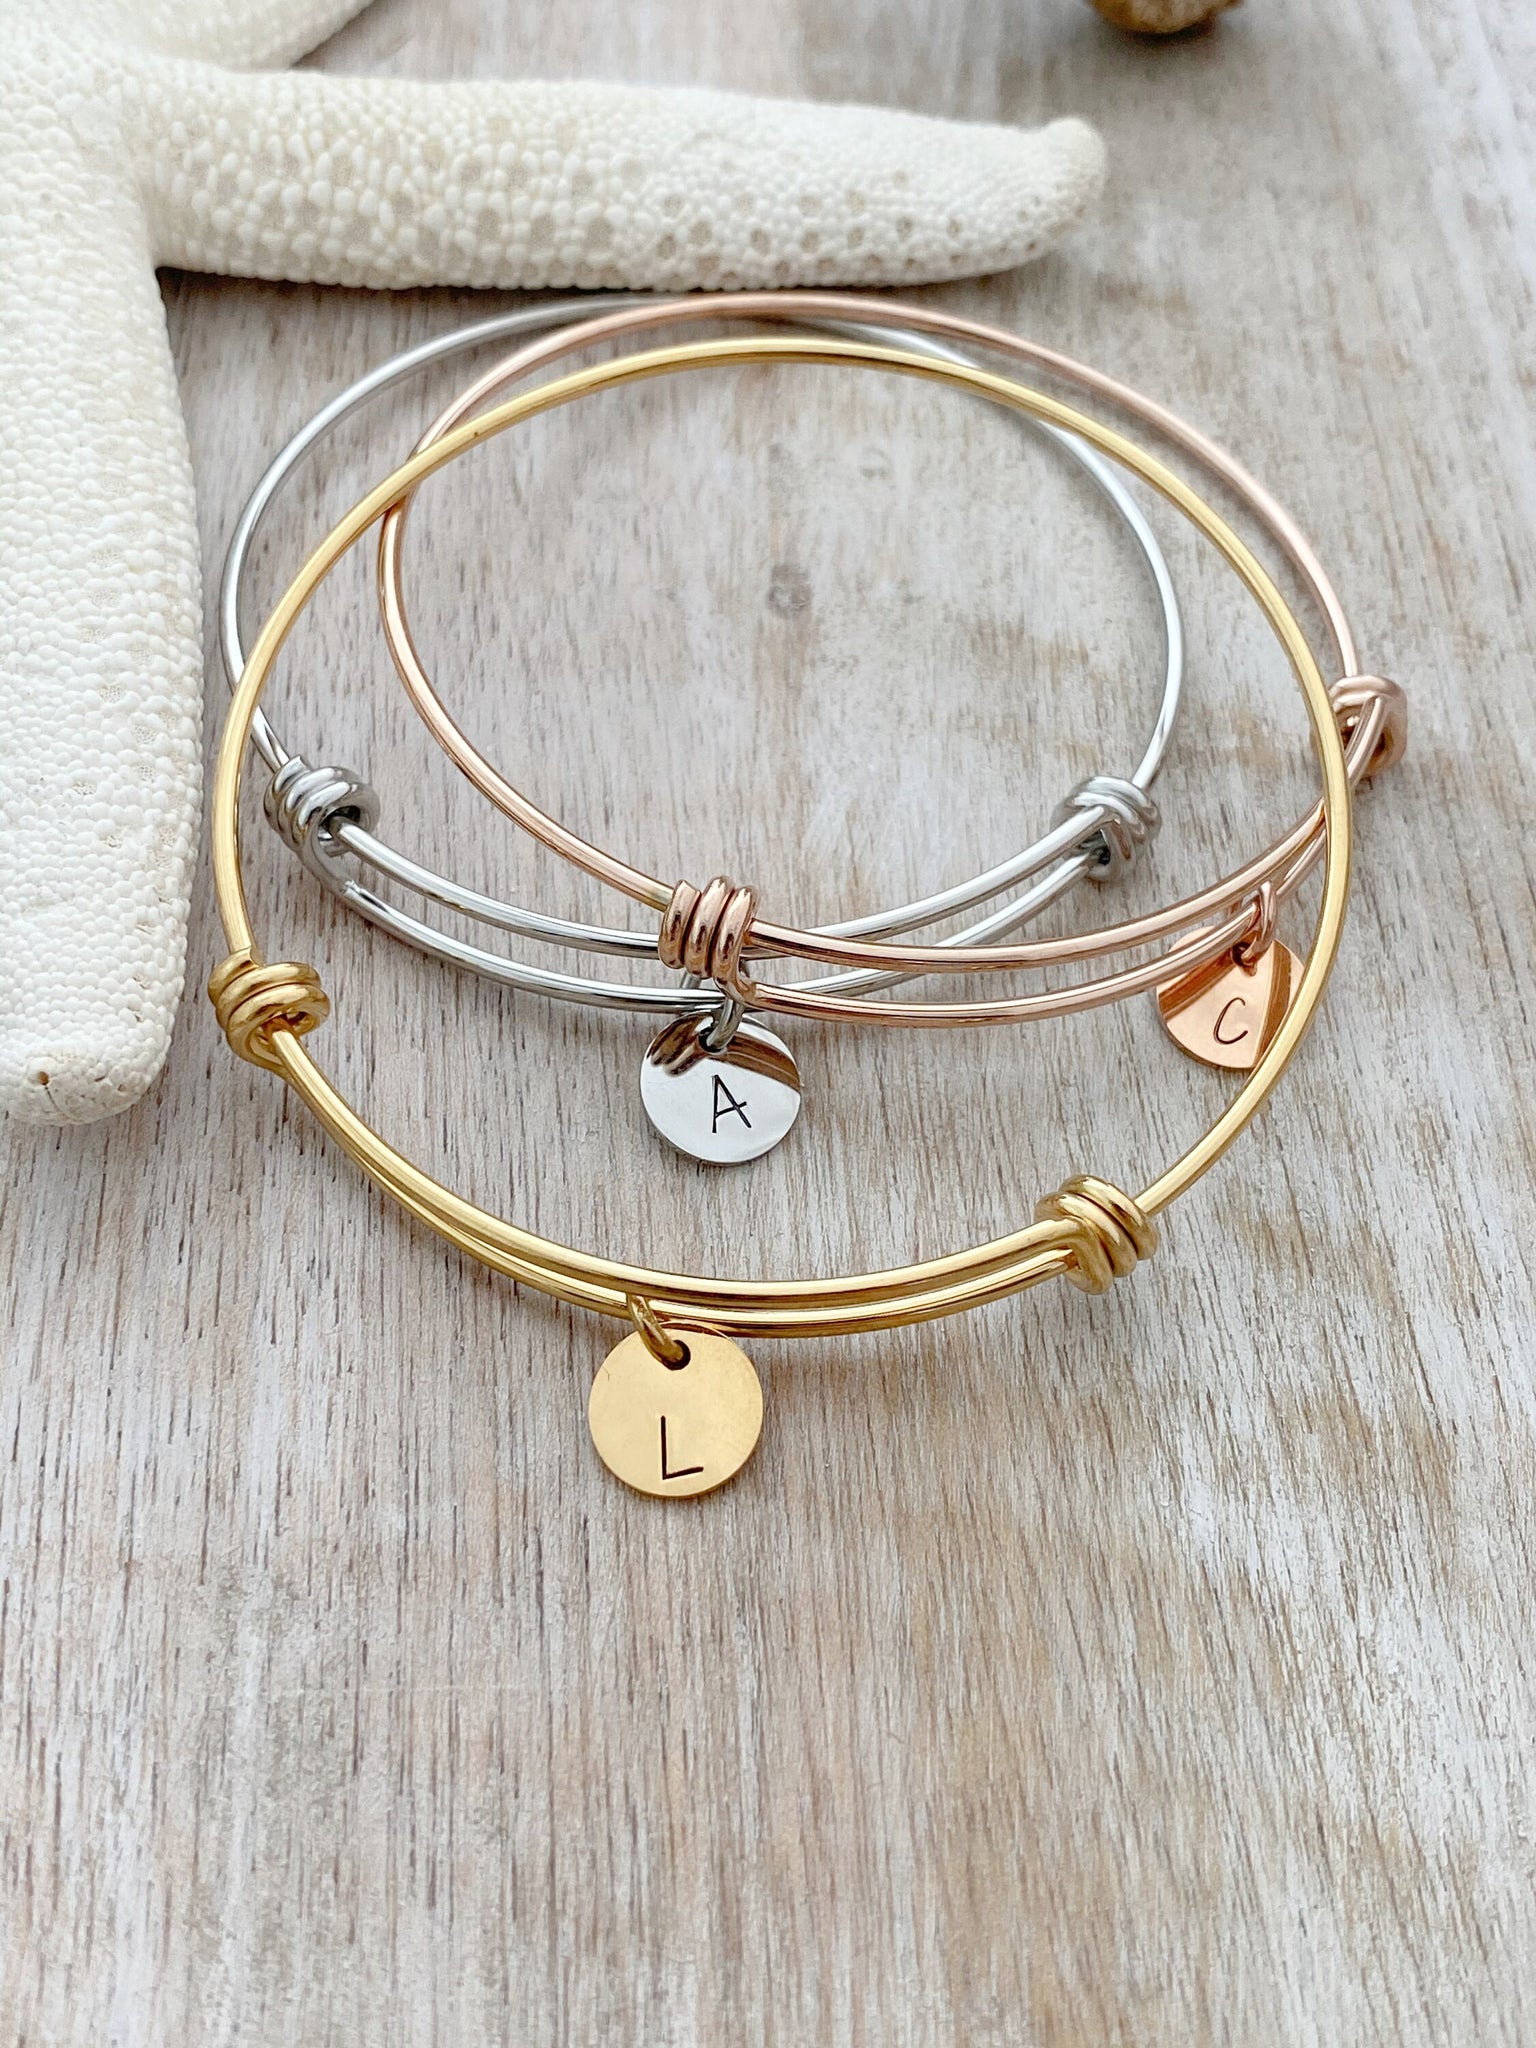 TINGN Initial Charm Bracelets for Women Gifts India | Ubuy